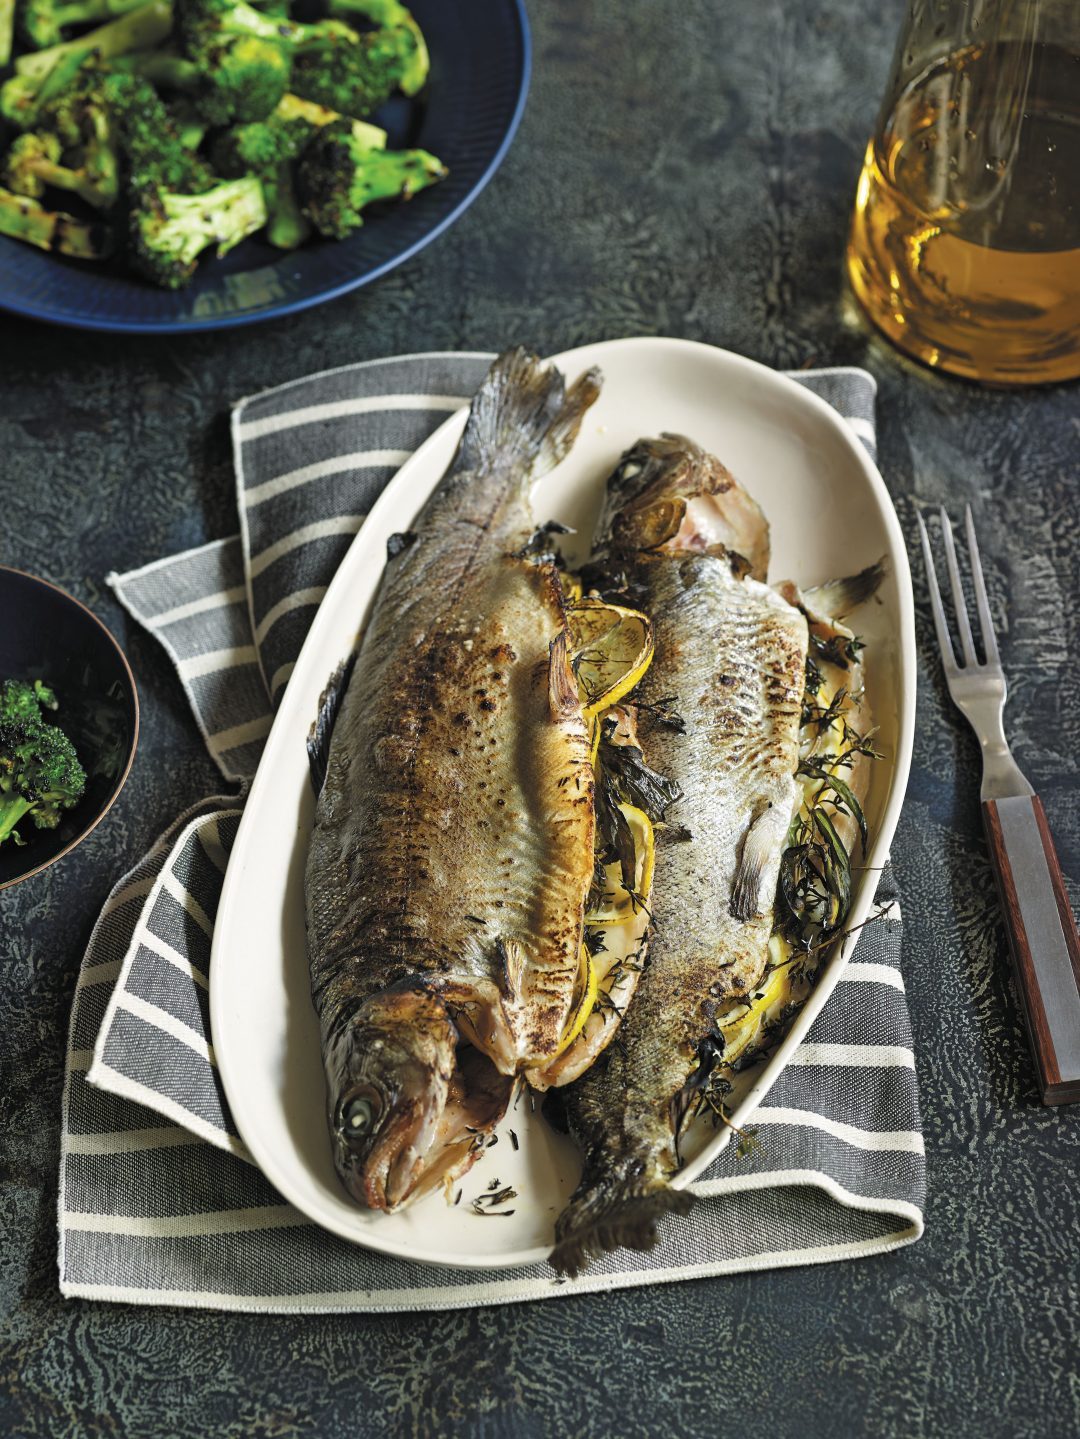 Grilled Whole Trout in Parchment Paper with Garlic Broccoli